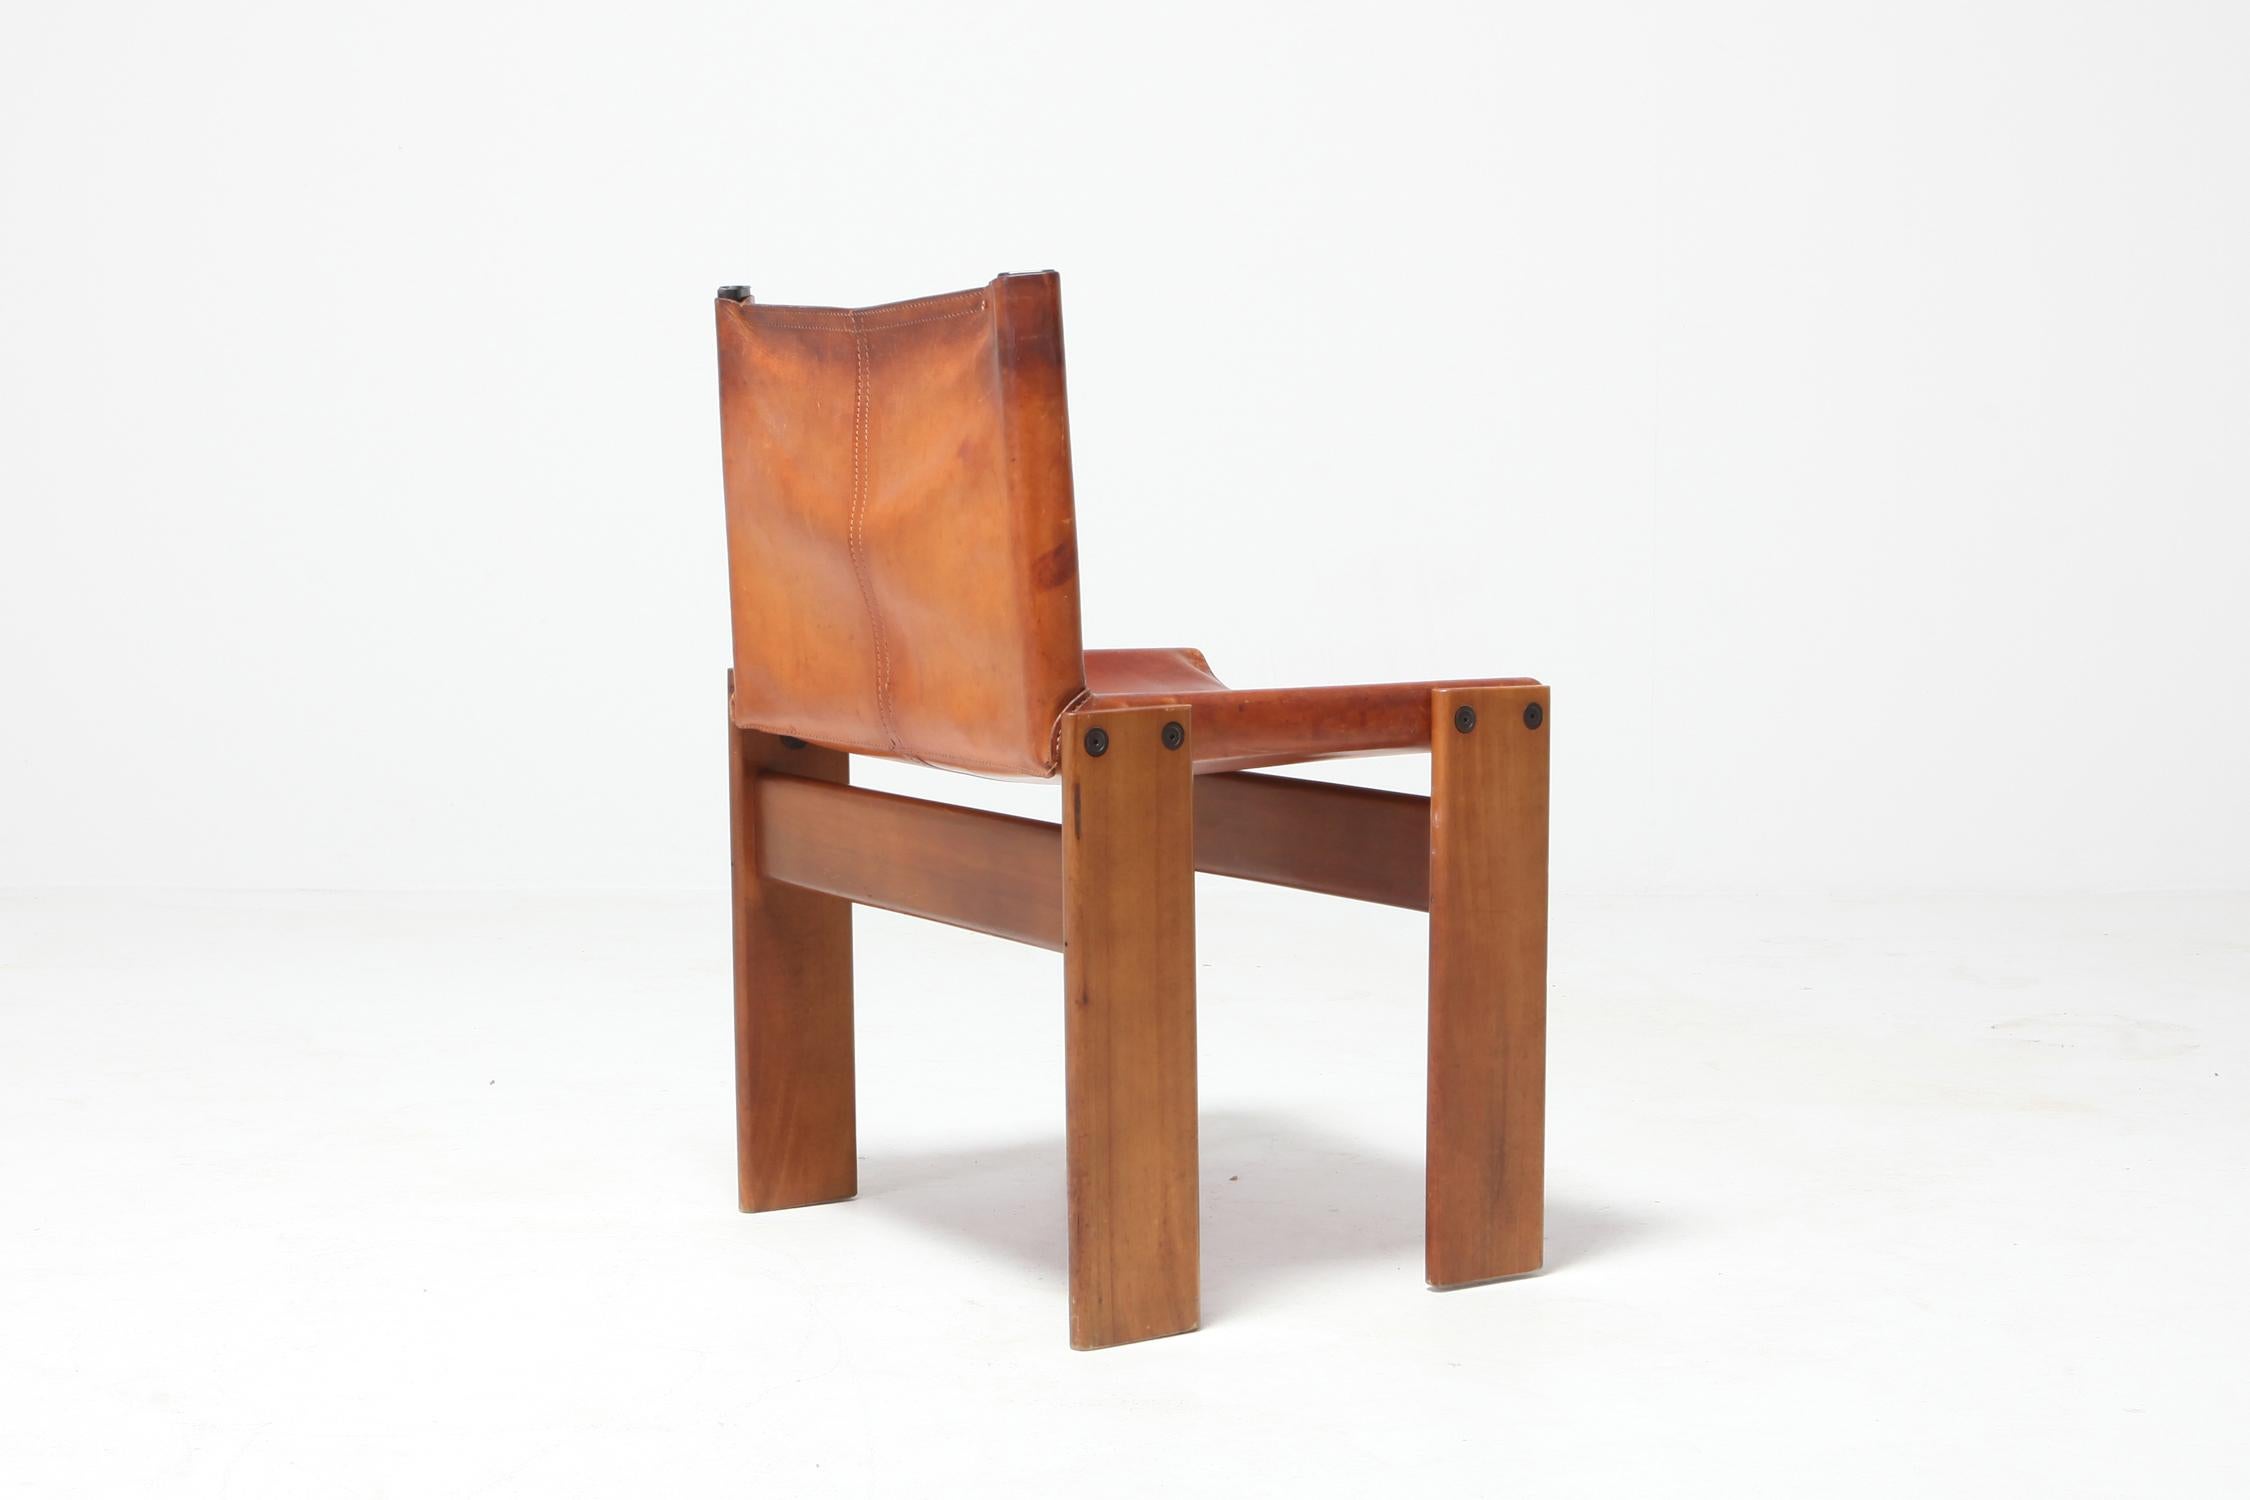 Scarpa 'Monk' Chairs in Patinated Cognac Leather, Set of Four 2